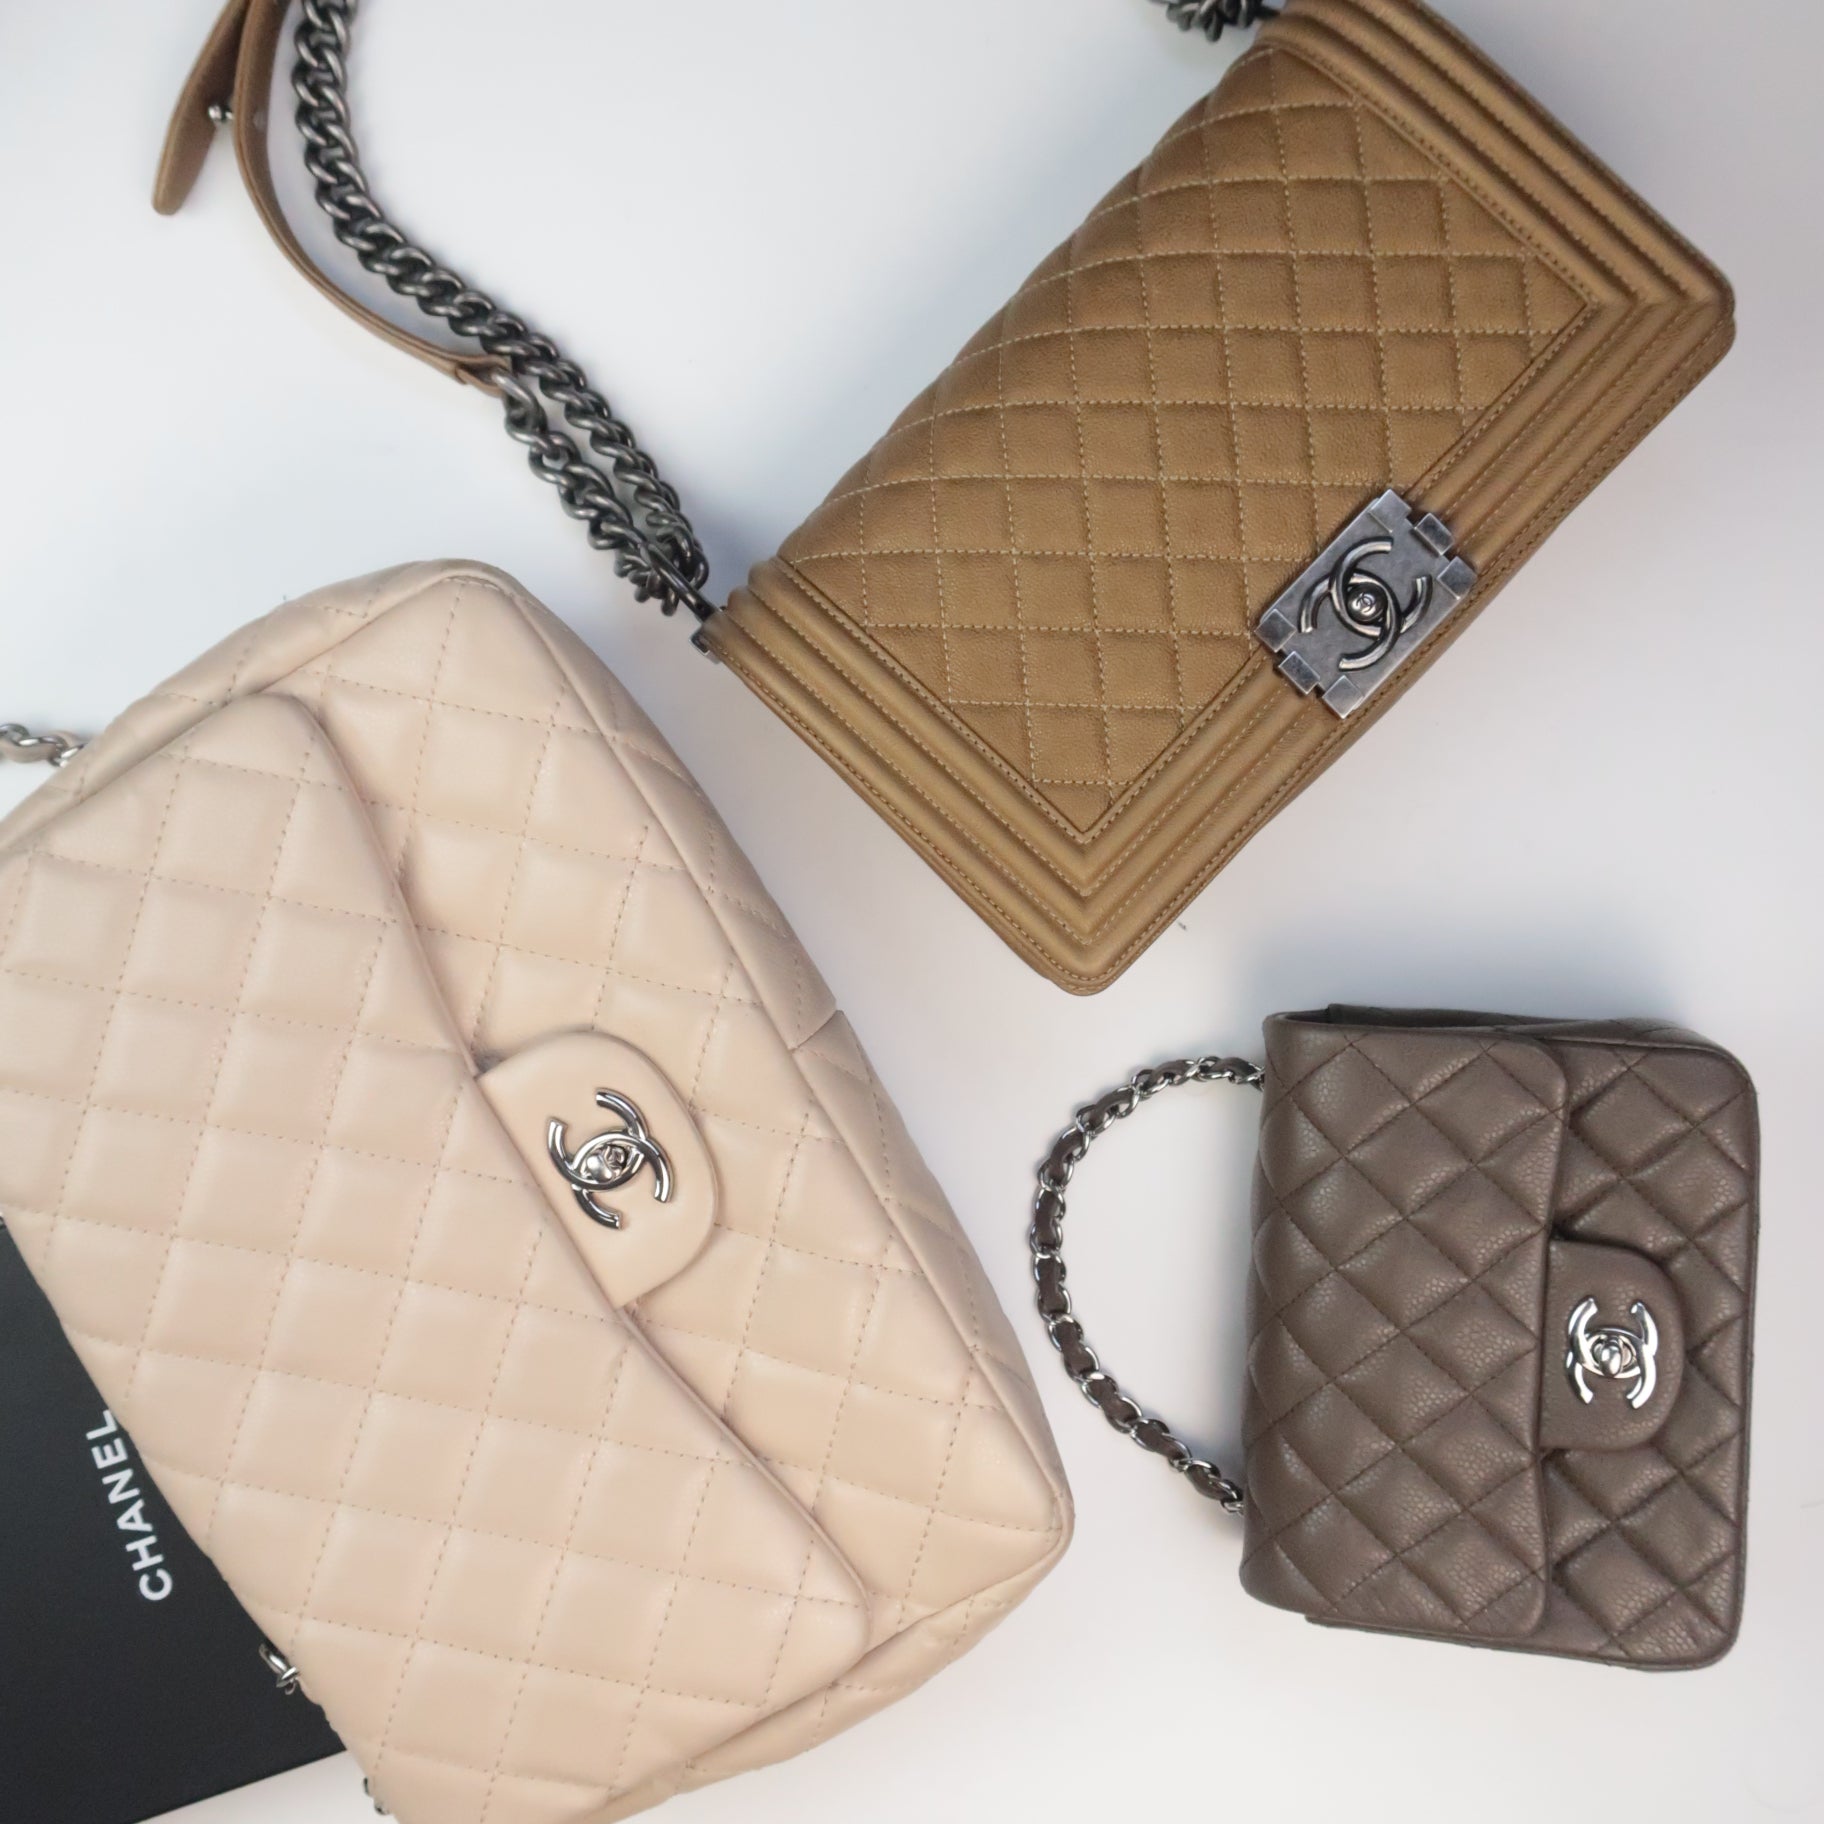 CHANEL RECTANGLE MINI VS SMALL CLASSIC FLAP- choosing your first Chanel bag  & SINBONO bag unboxing! 